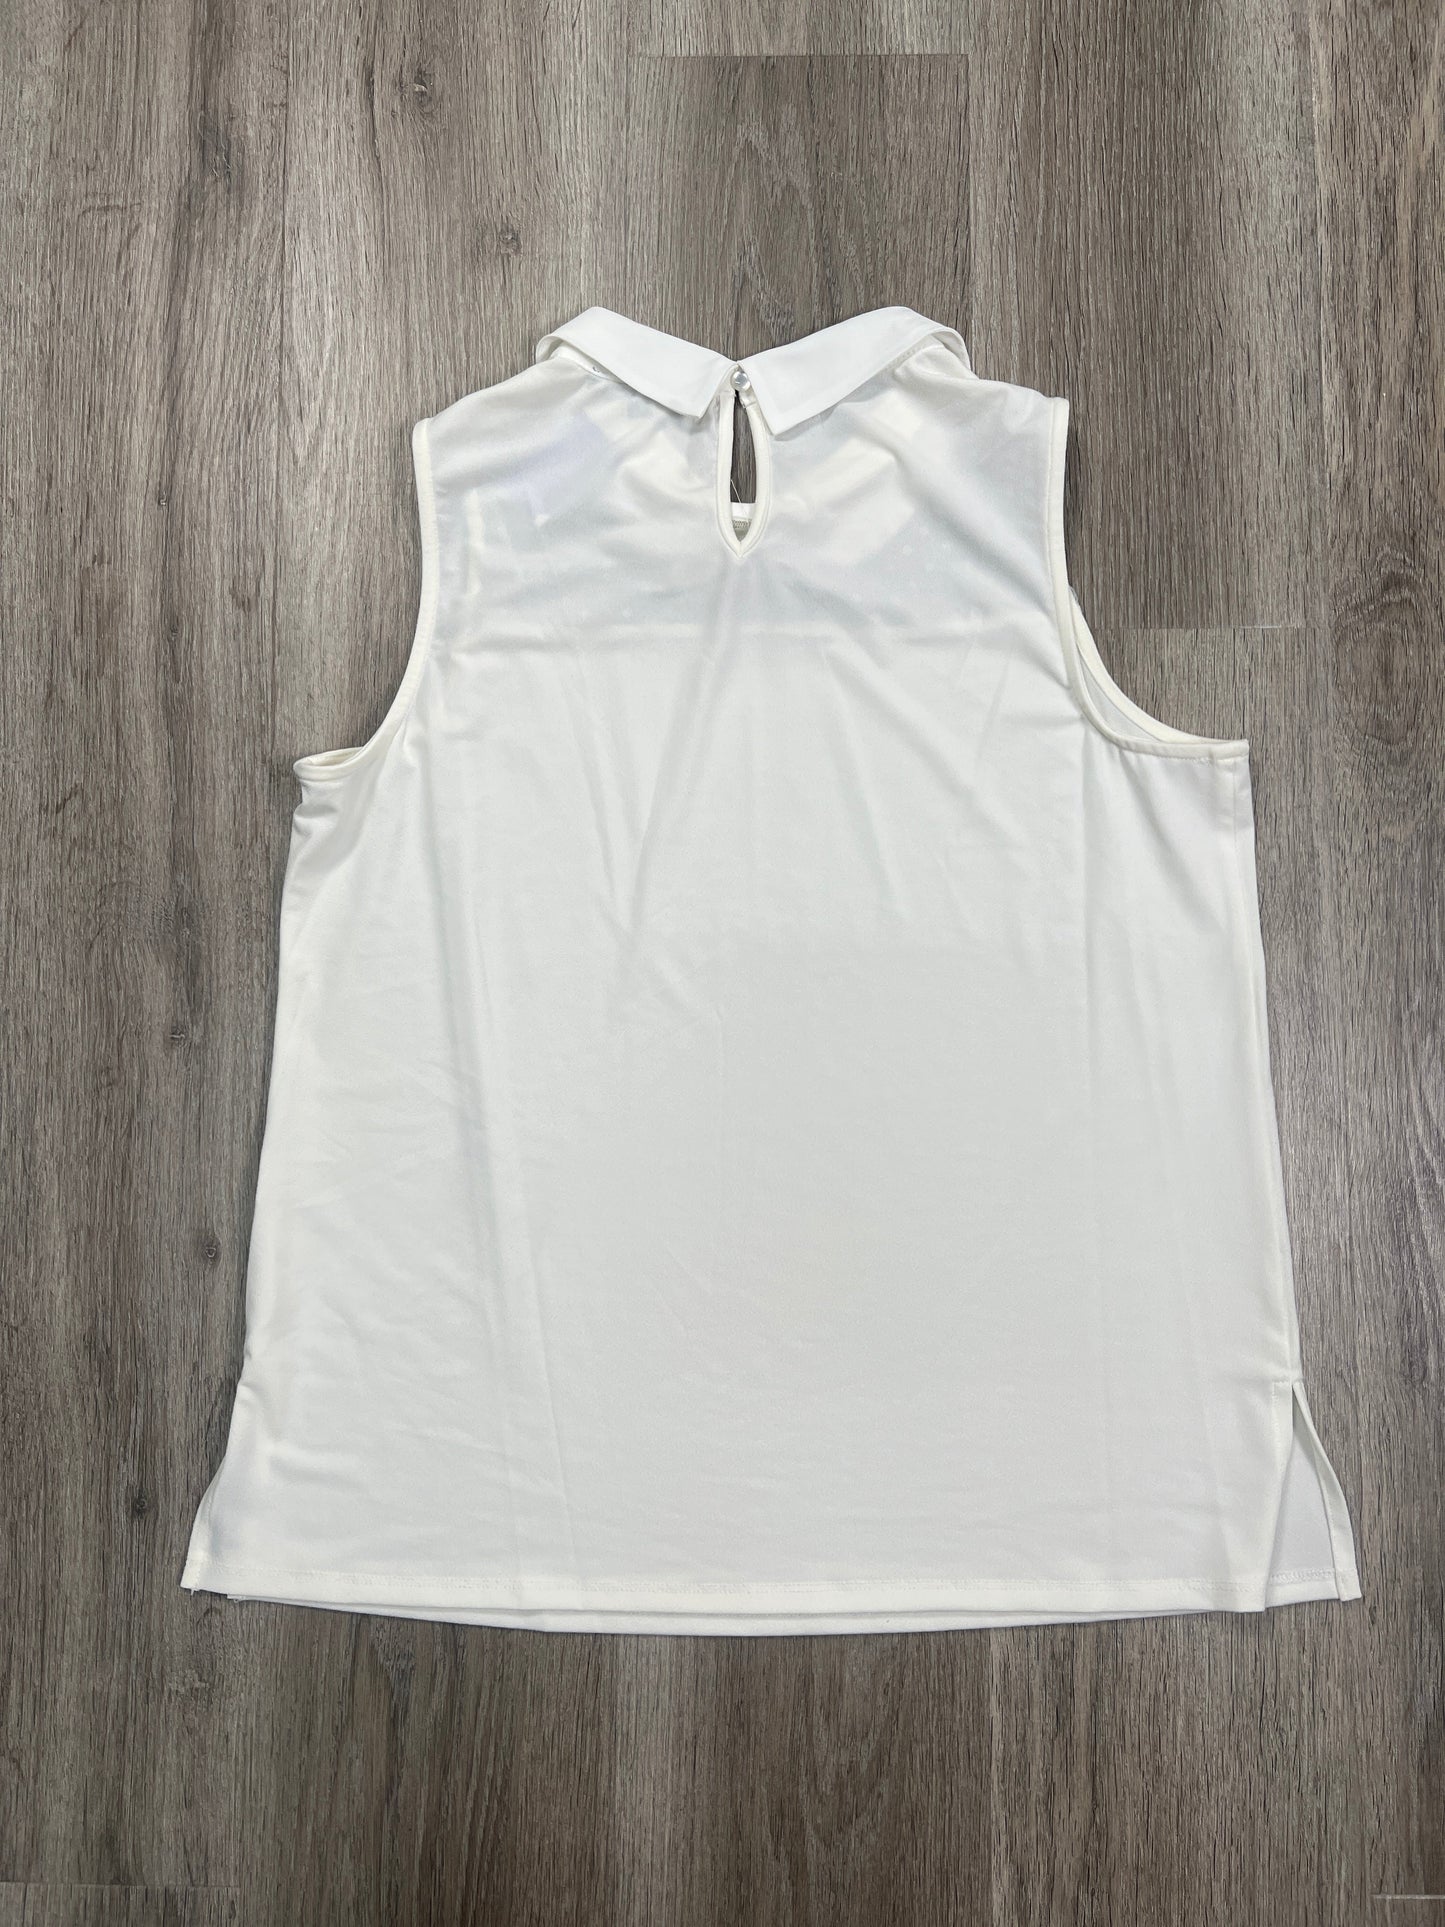 Blouse Sleeveless By Adrianna Papell  Size: M